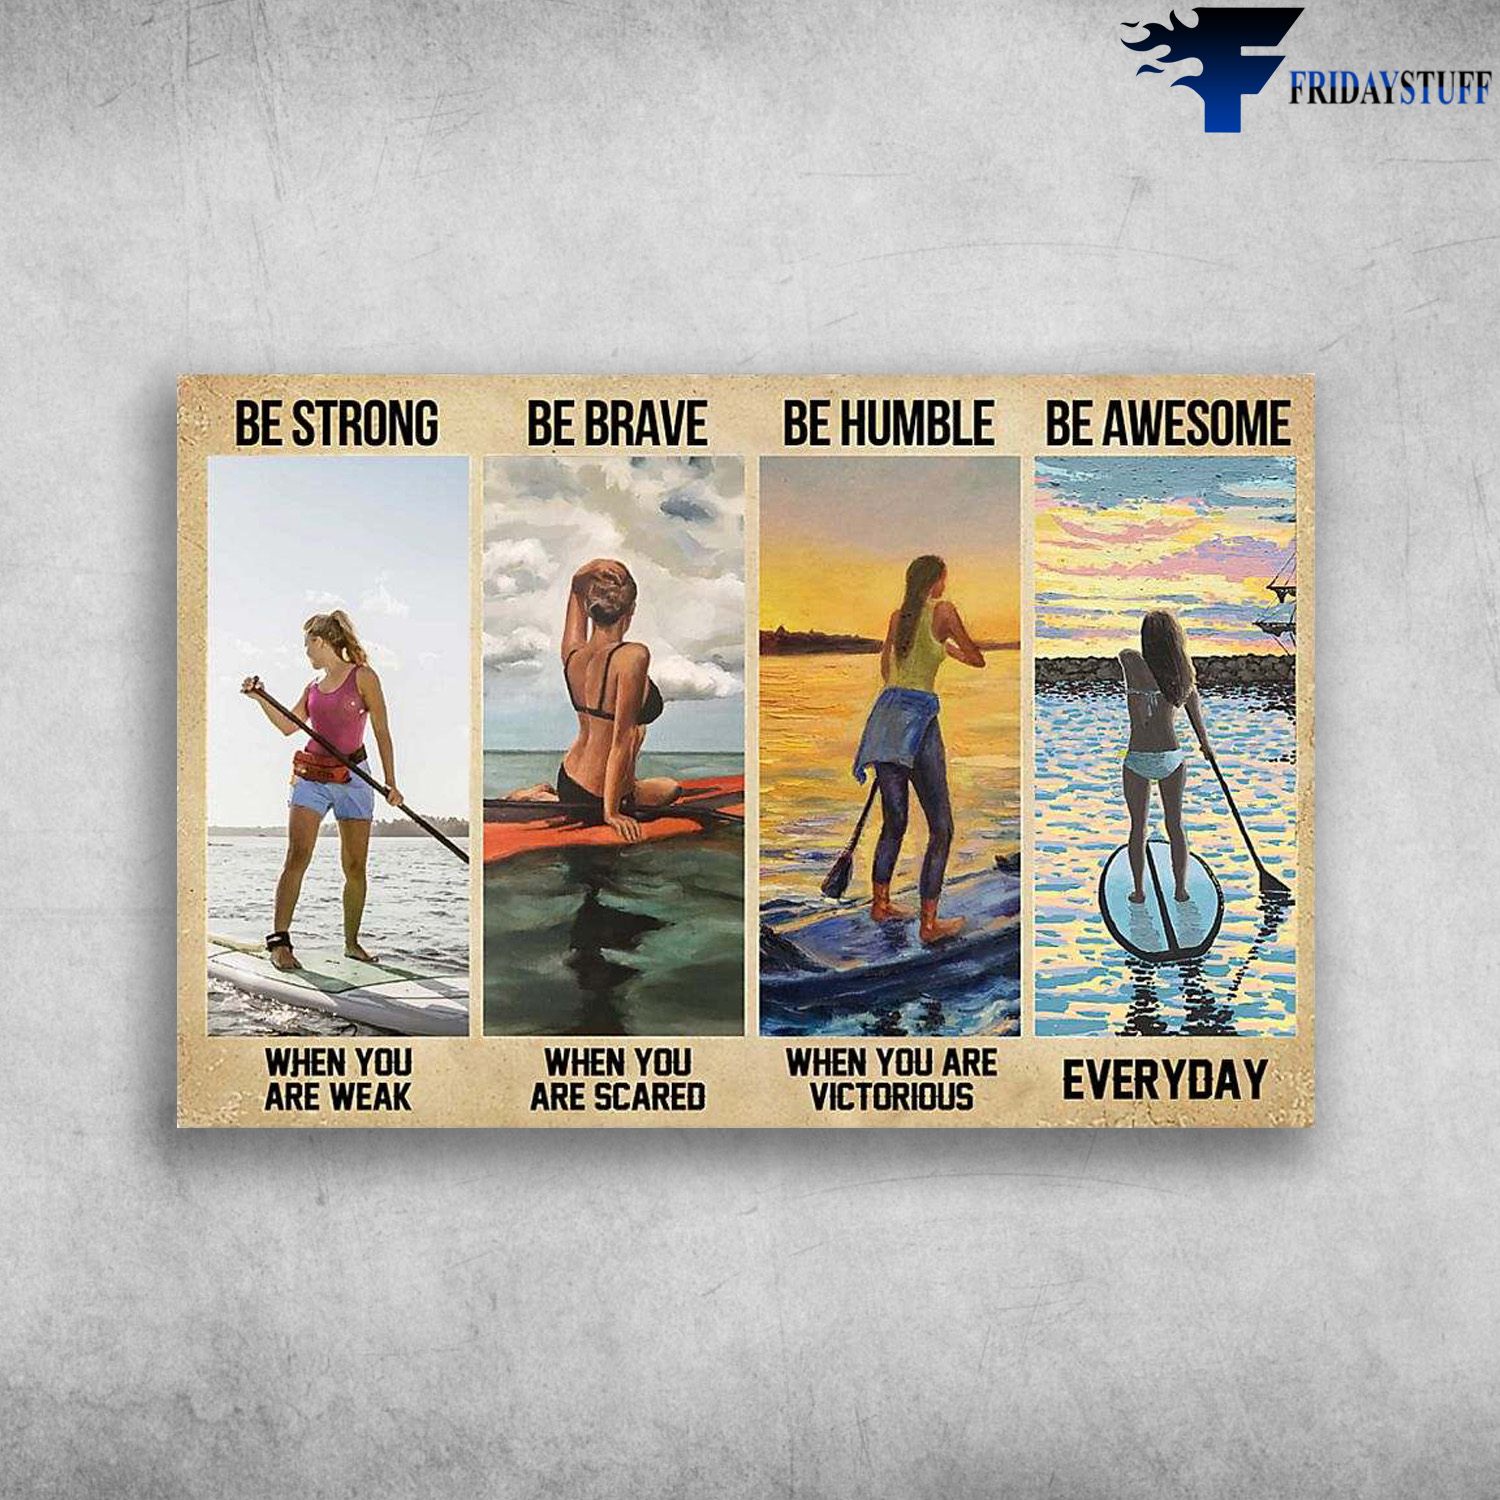 Standup paddleboarding - Be Strong When You Are Weak, Be Brave When You Are Scared, Be Humble When You Are Victorious, Be Awesome Everyday